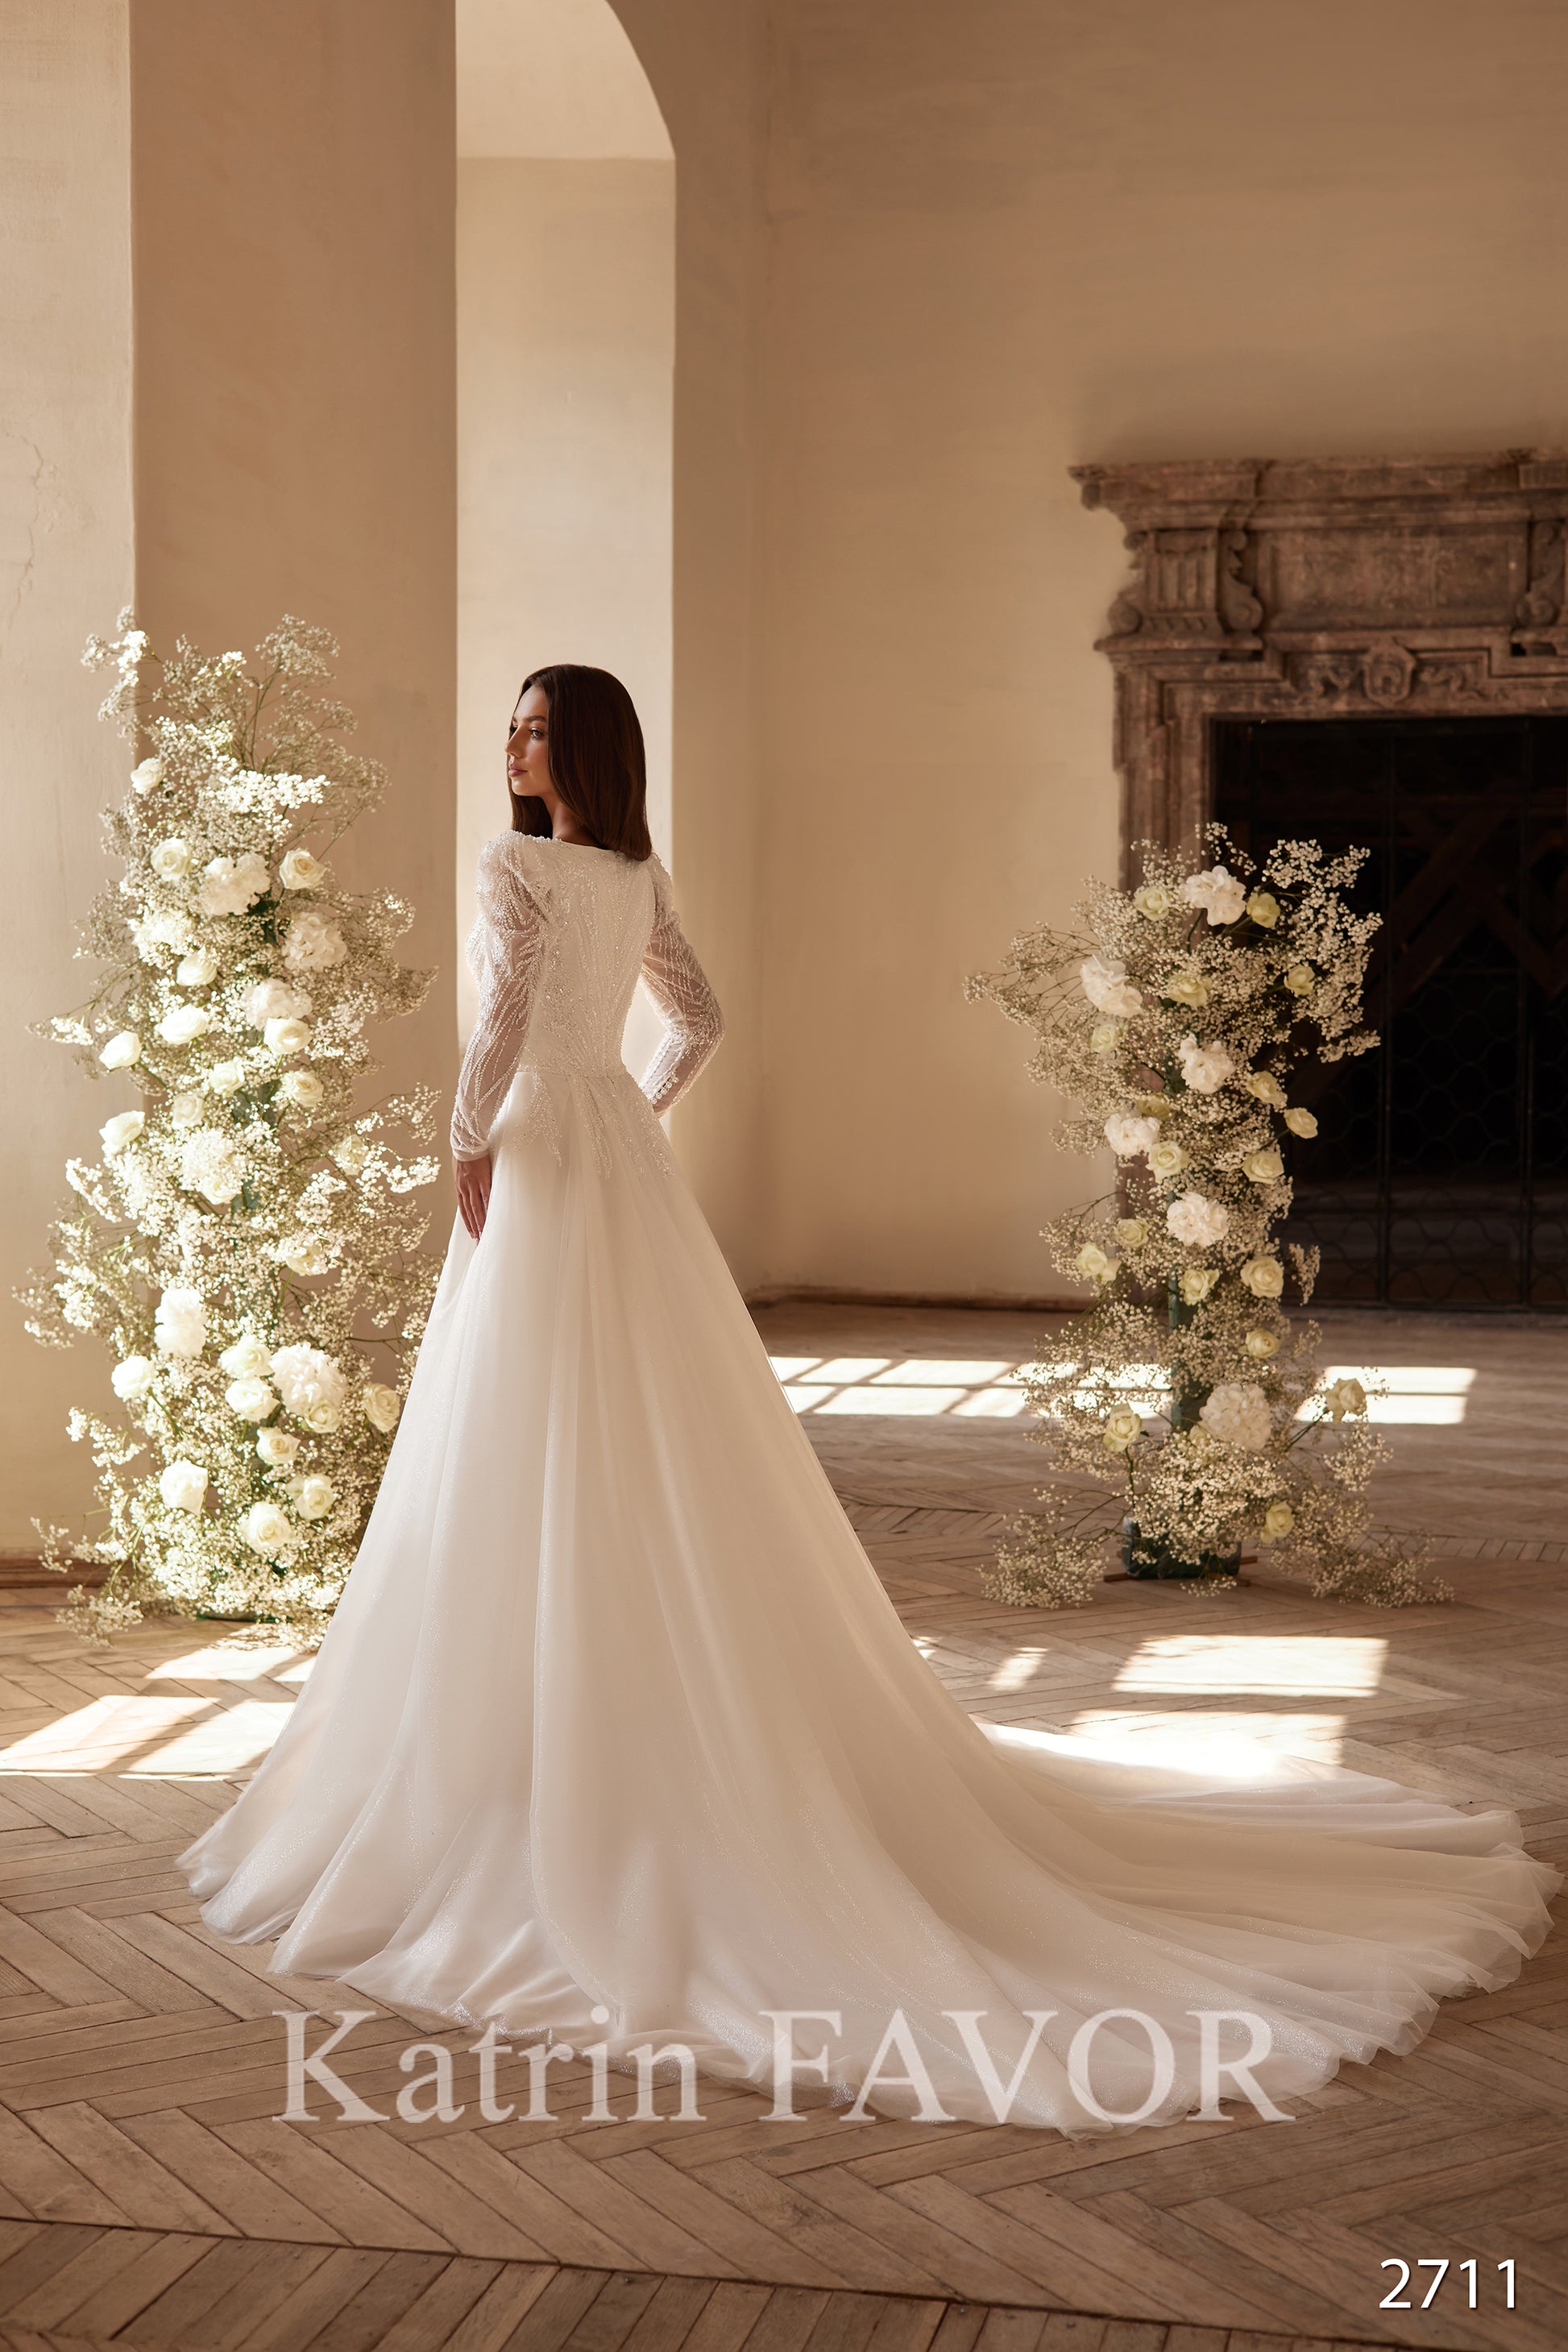 Long sleeve cathedral wedding dress